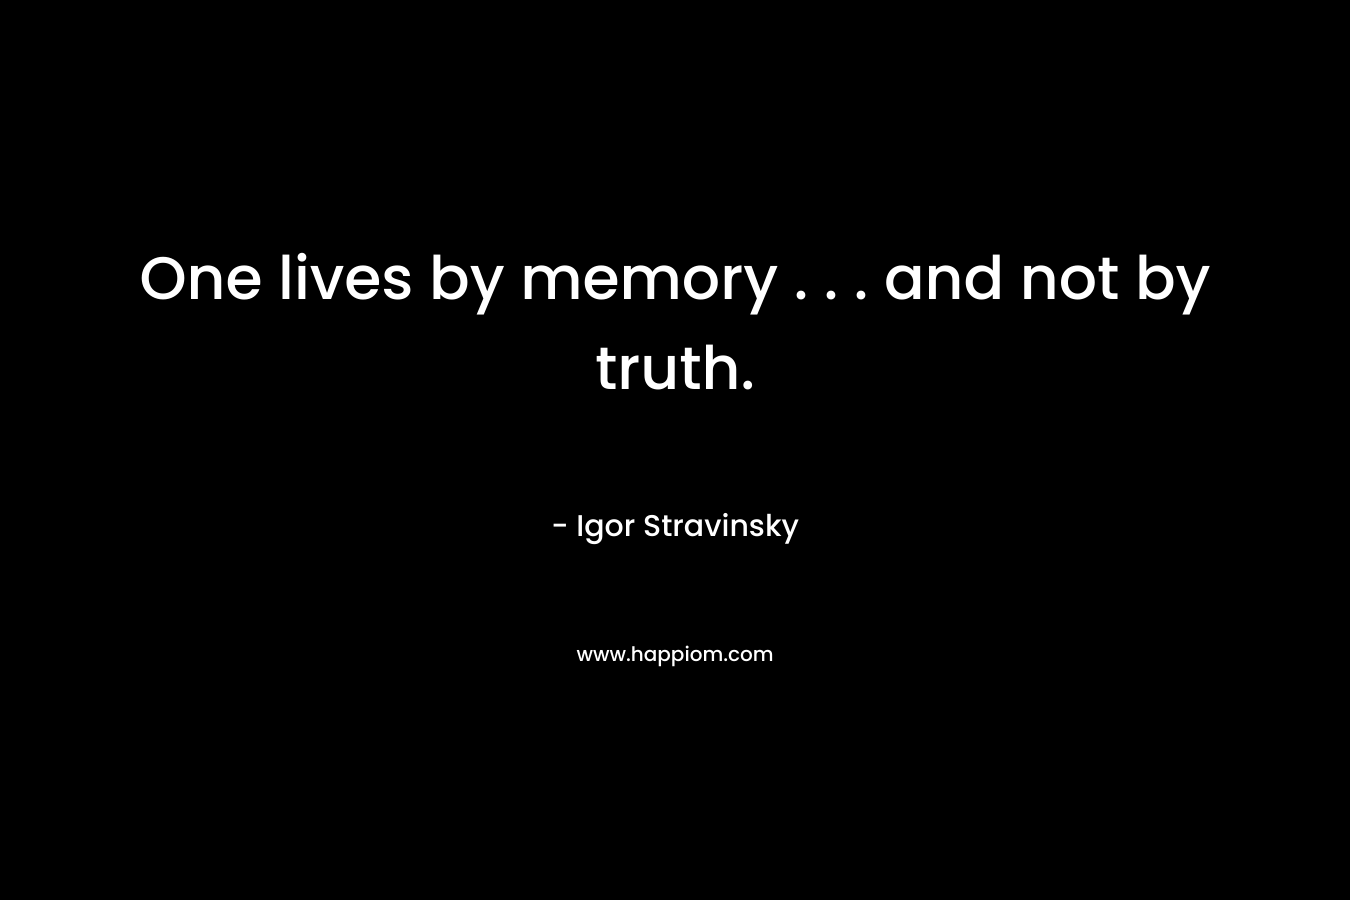 One lives by memory . . . and not by truth. – Igor Stravinsky